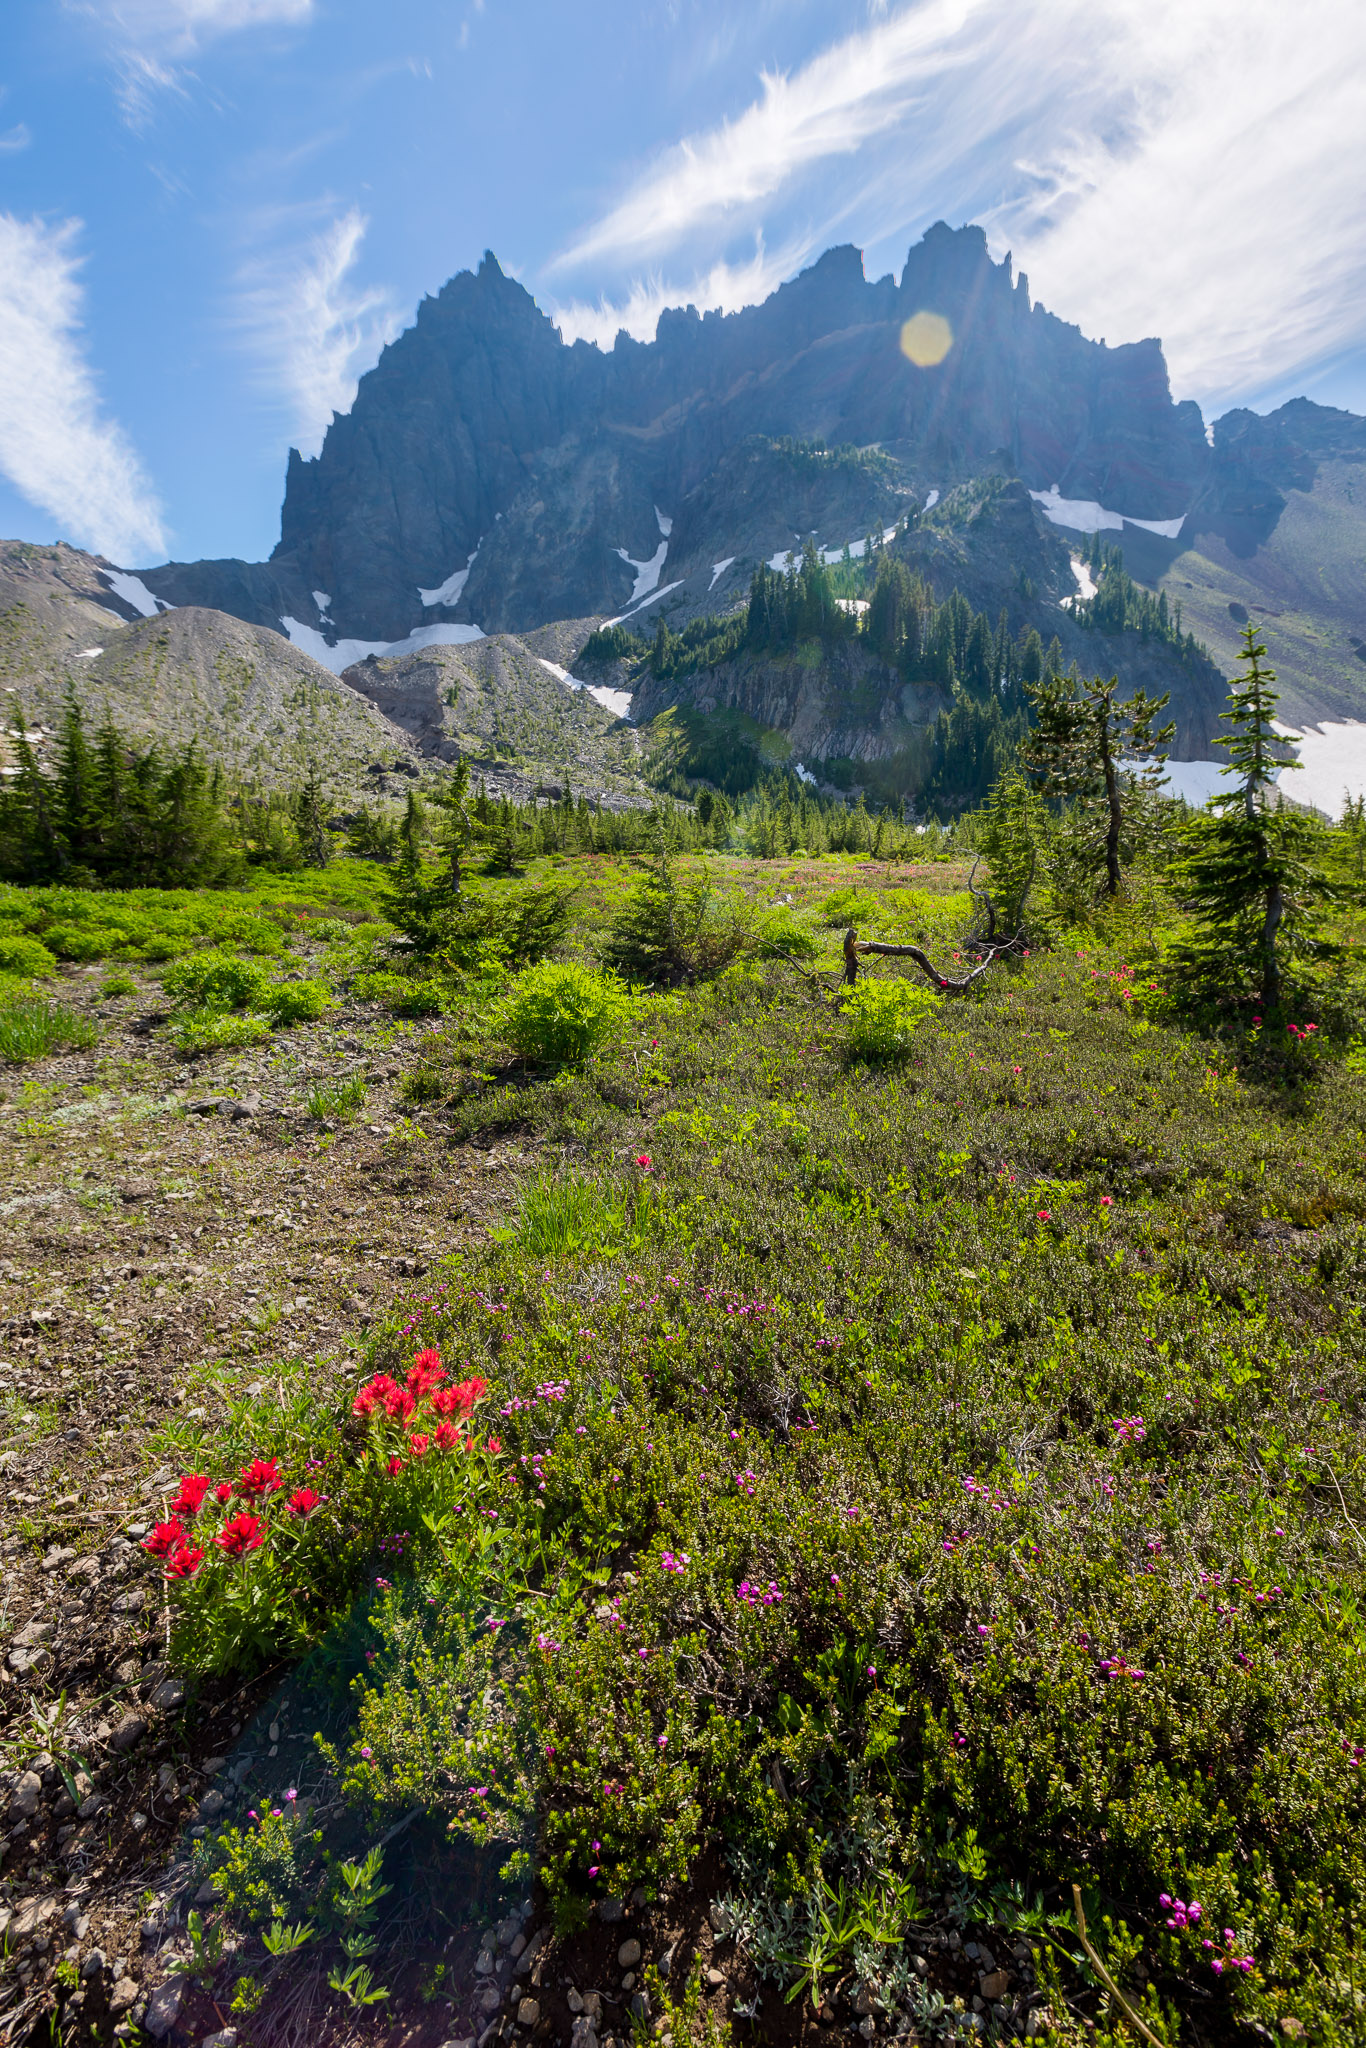 Upper Canyon Creek Meadows & 3 Fingered Jack, with a few paintbrush & heather